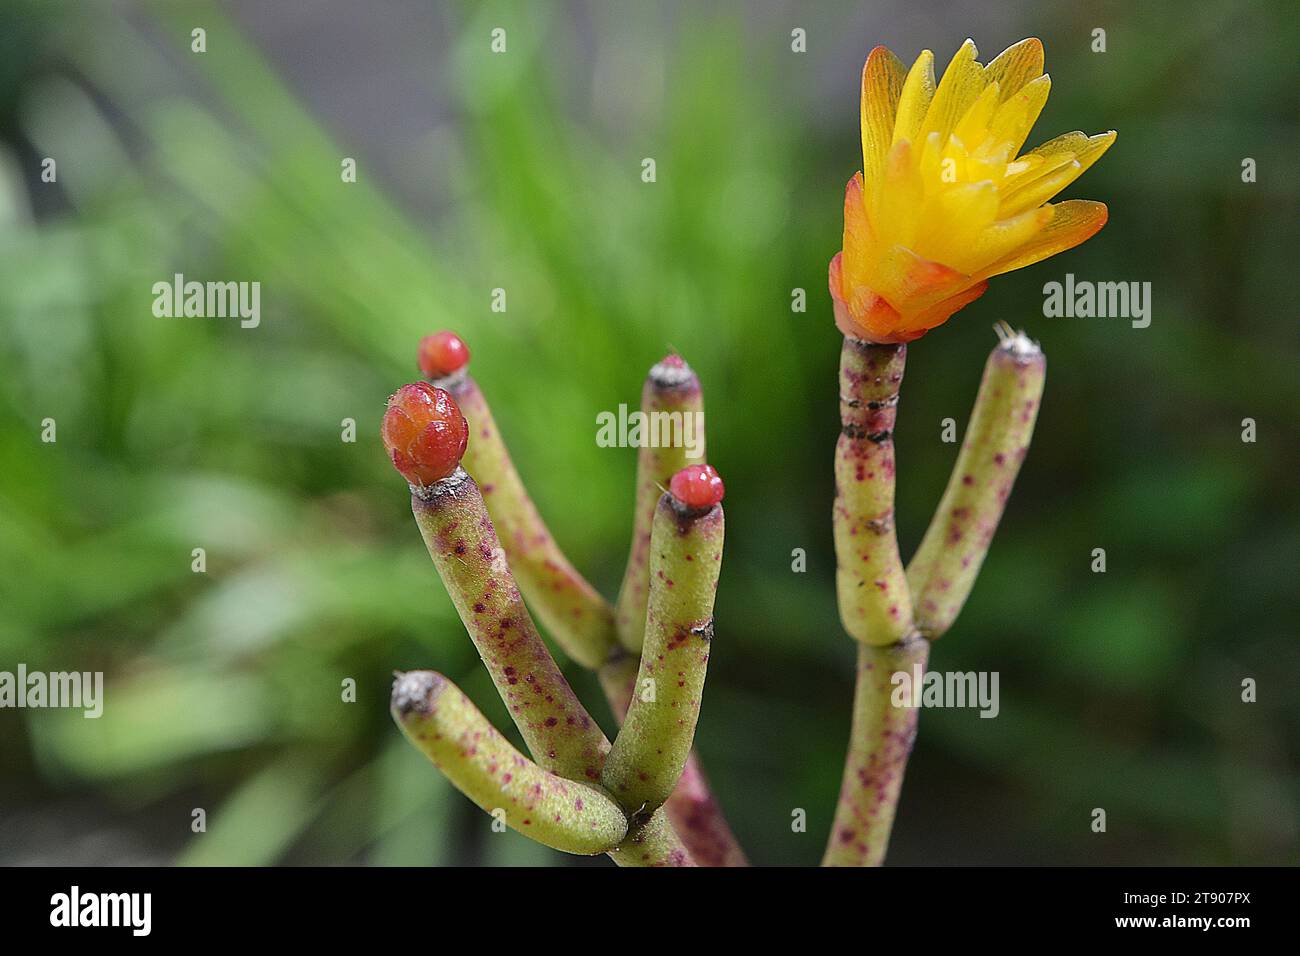 Dancing bonés is origin in Brazil and is one of the few species of cacti that does not have spines and its flowers measure up to 2cm in length. Stock Photo